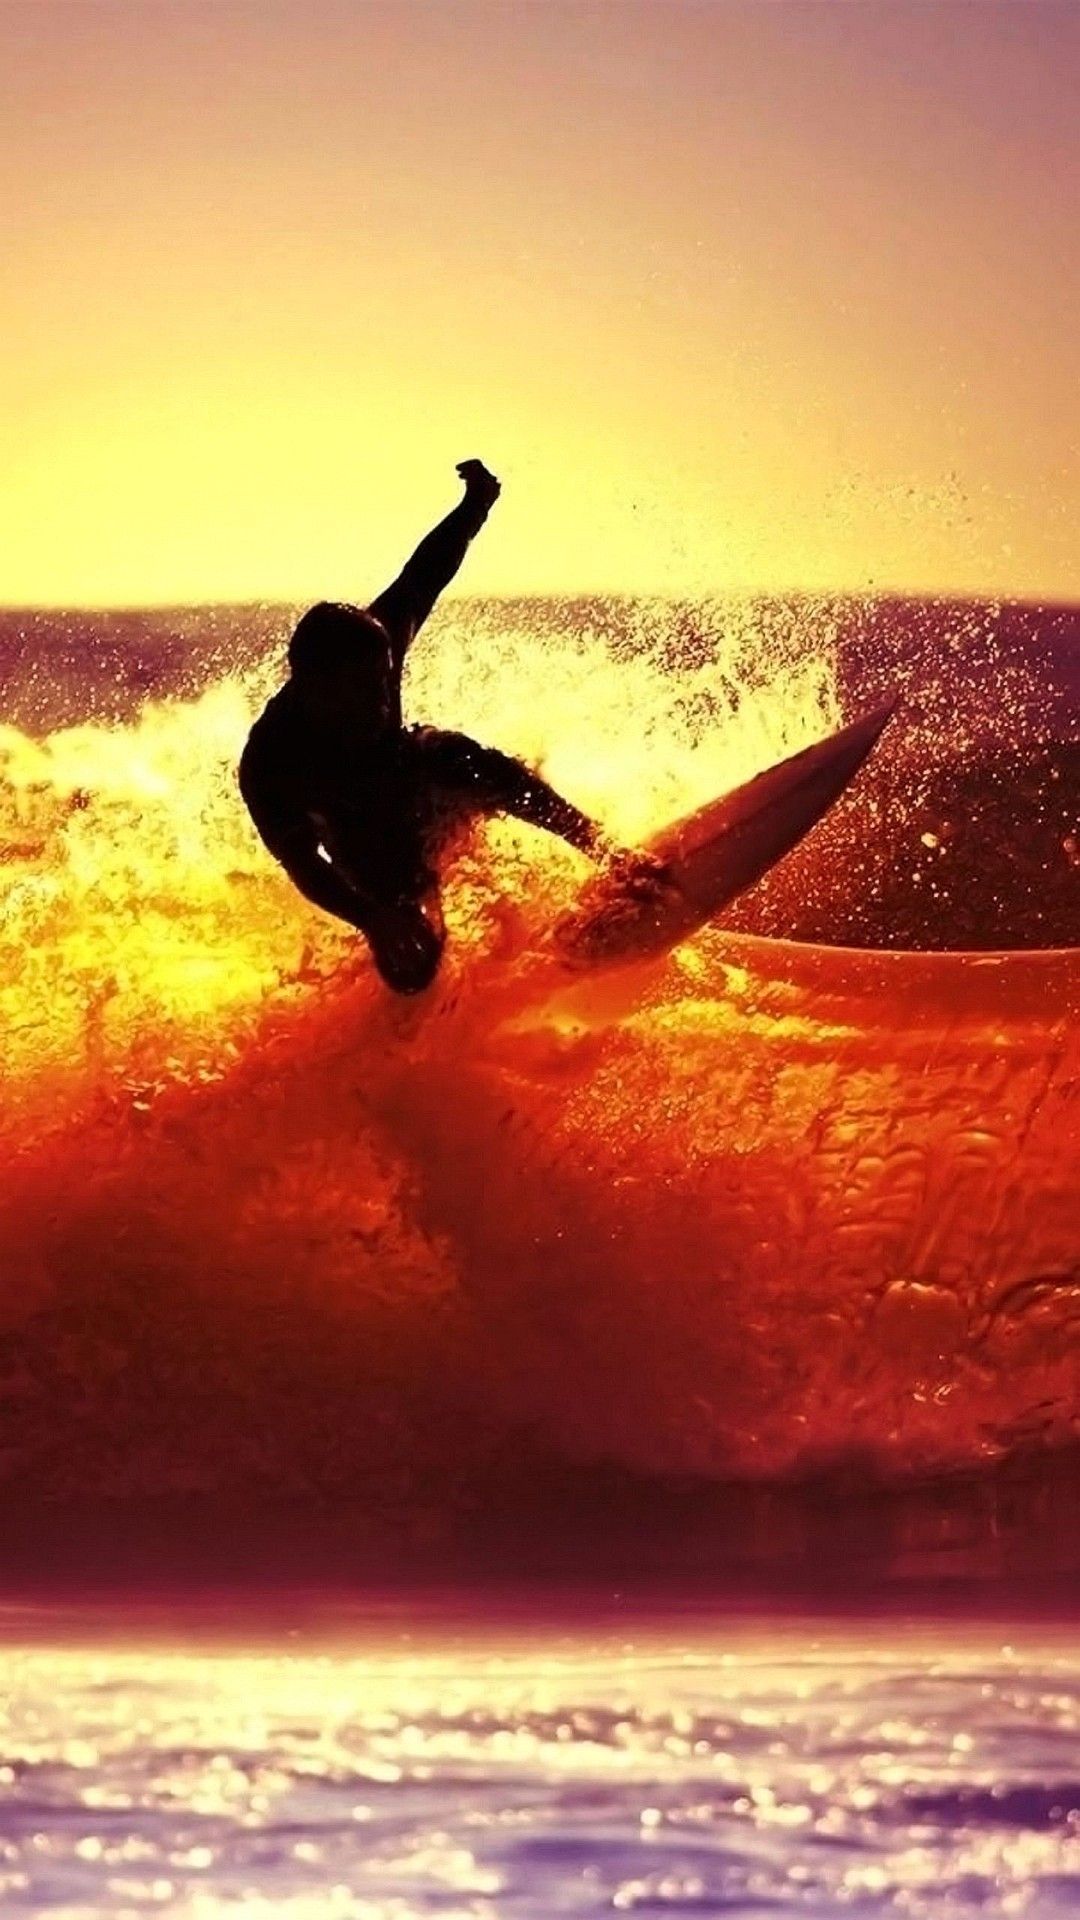 Wallpaper Iphone 6 Plus Surfer 5 5 Inches - 1080 x 1920 - Iphone 6 ...